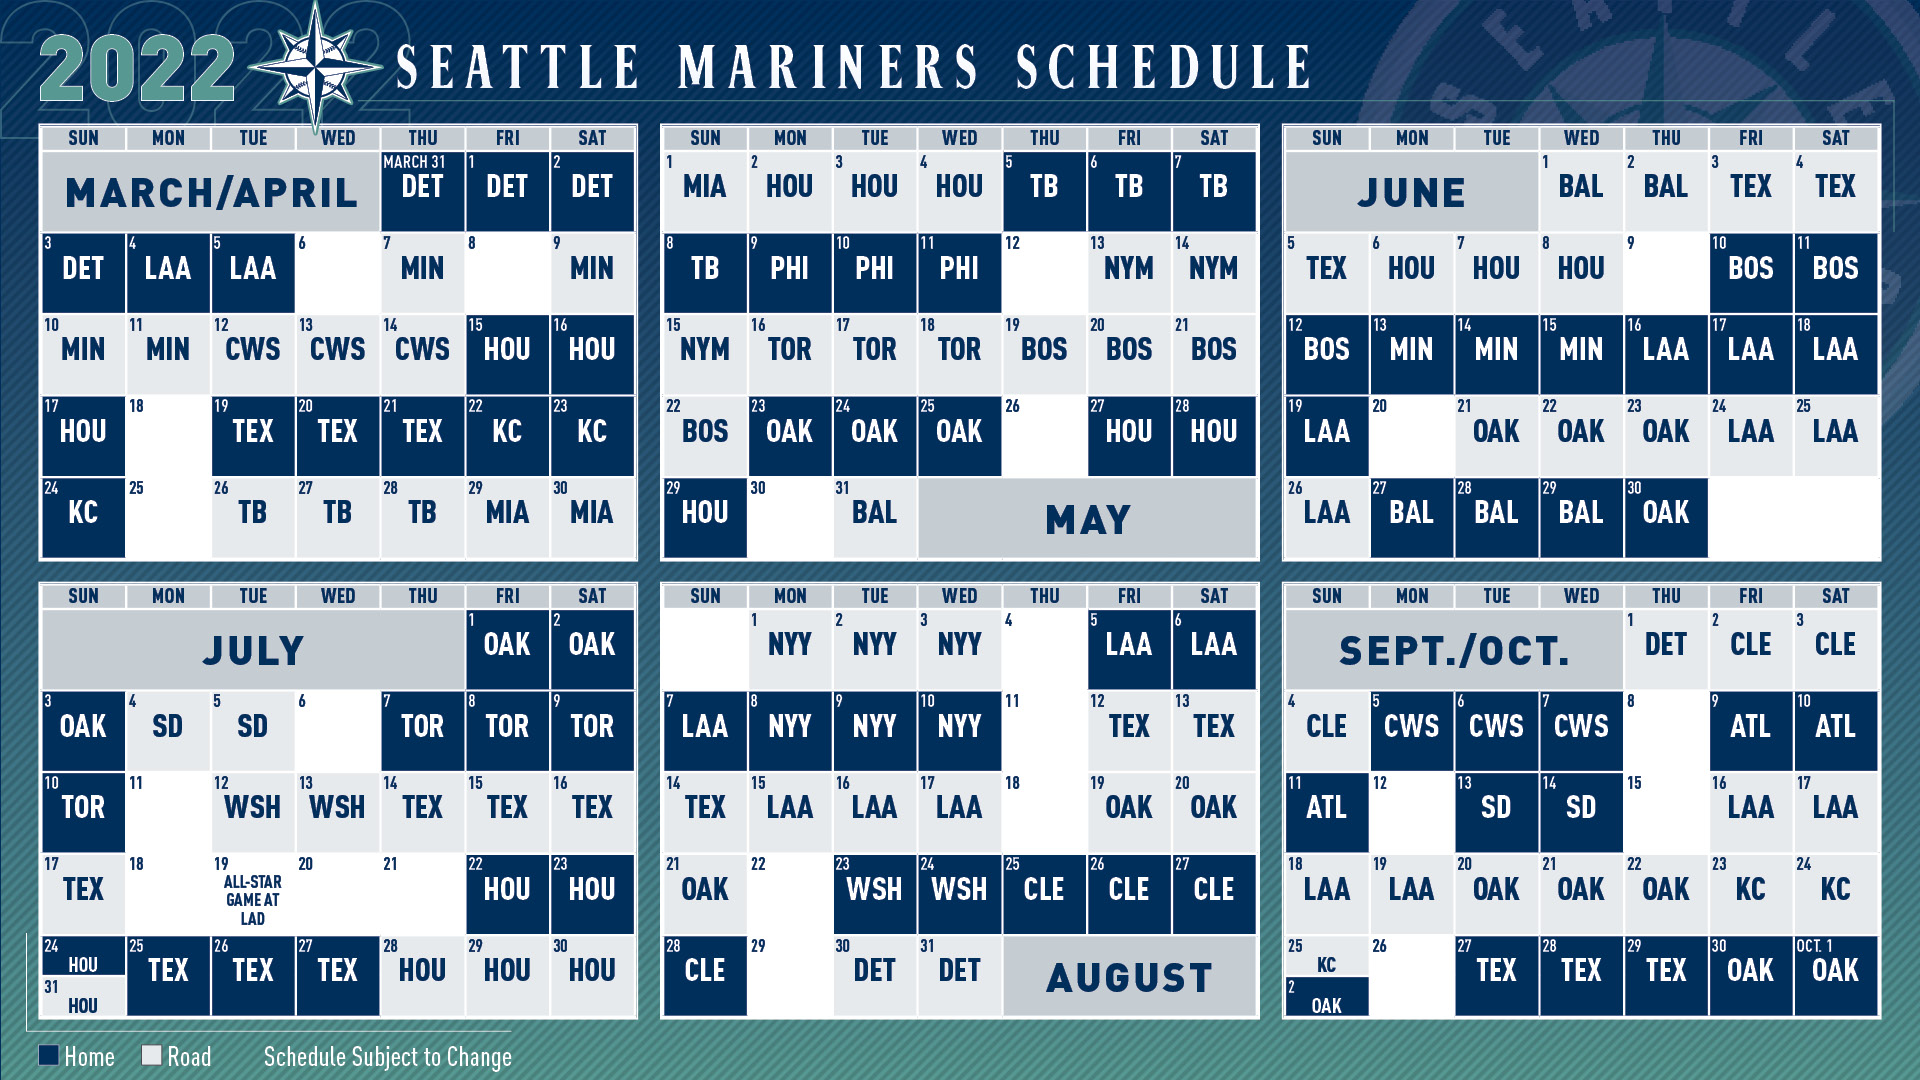 Seattle Mariners on Twitter "We’ll open the ‘22 season at home on